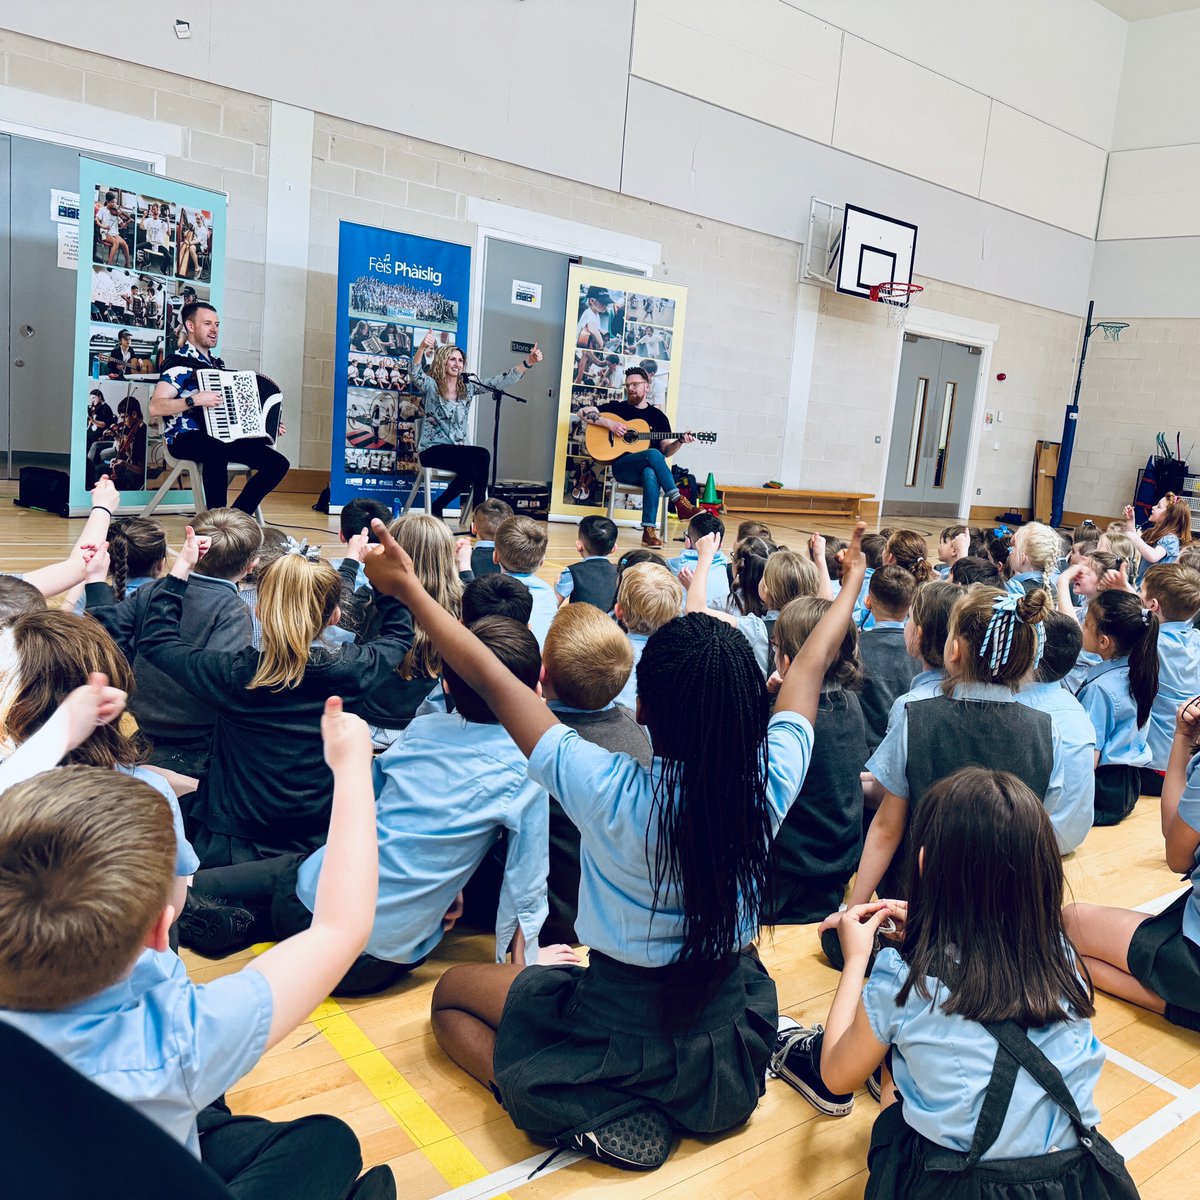 Applications for our annual Fèis Week this July are currently open. Find out more and sign-up here: feisphaislig.com/feis-week/ #StramashForSchools @fngaidheal @bordnagaidhlig